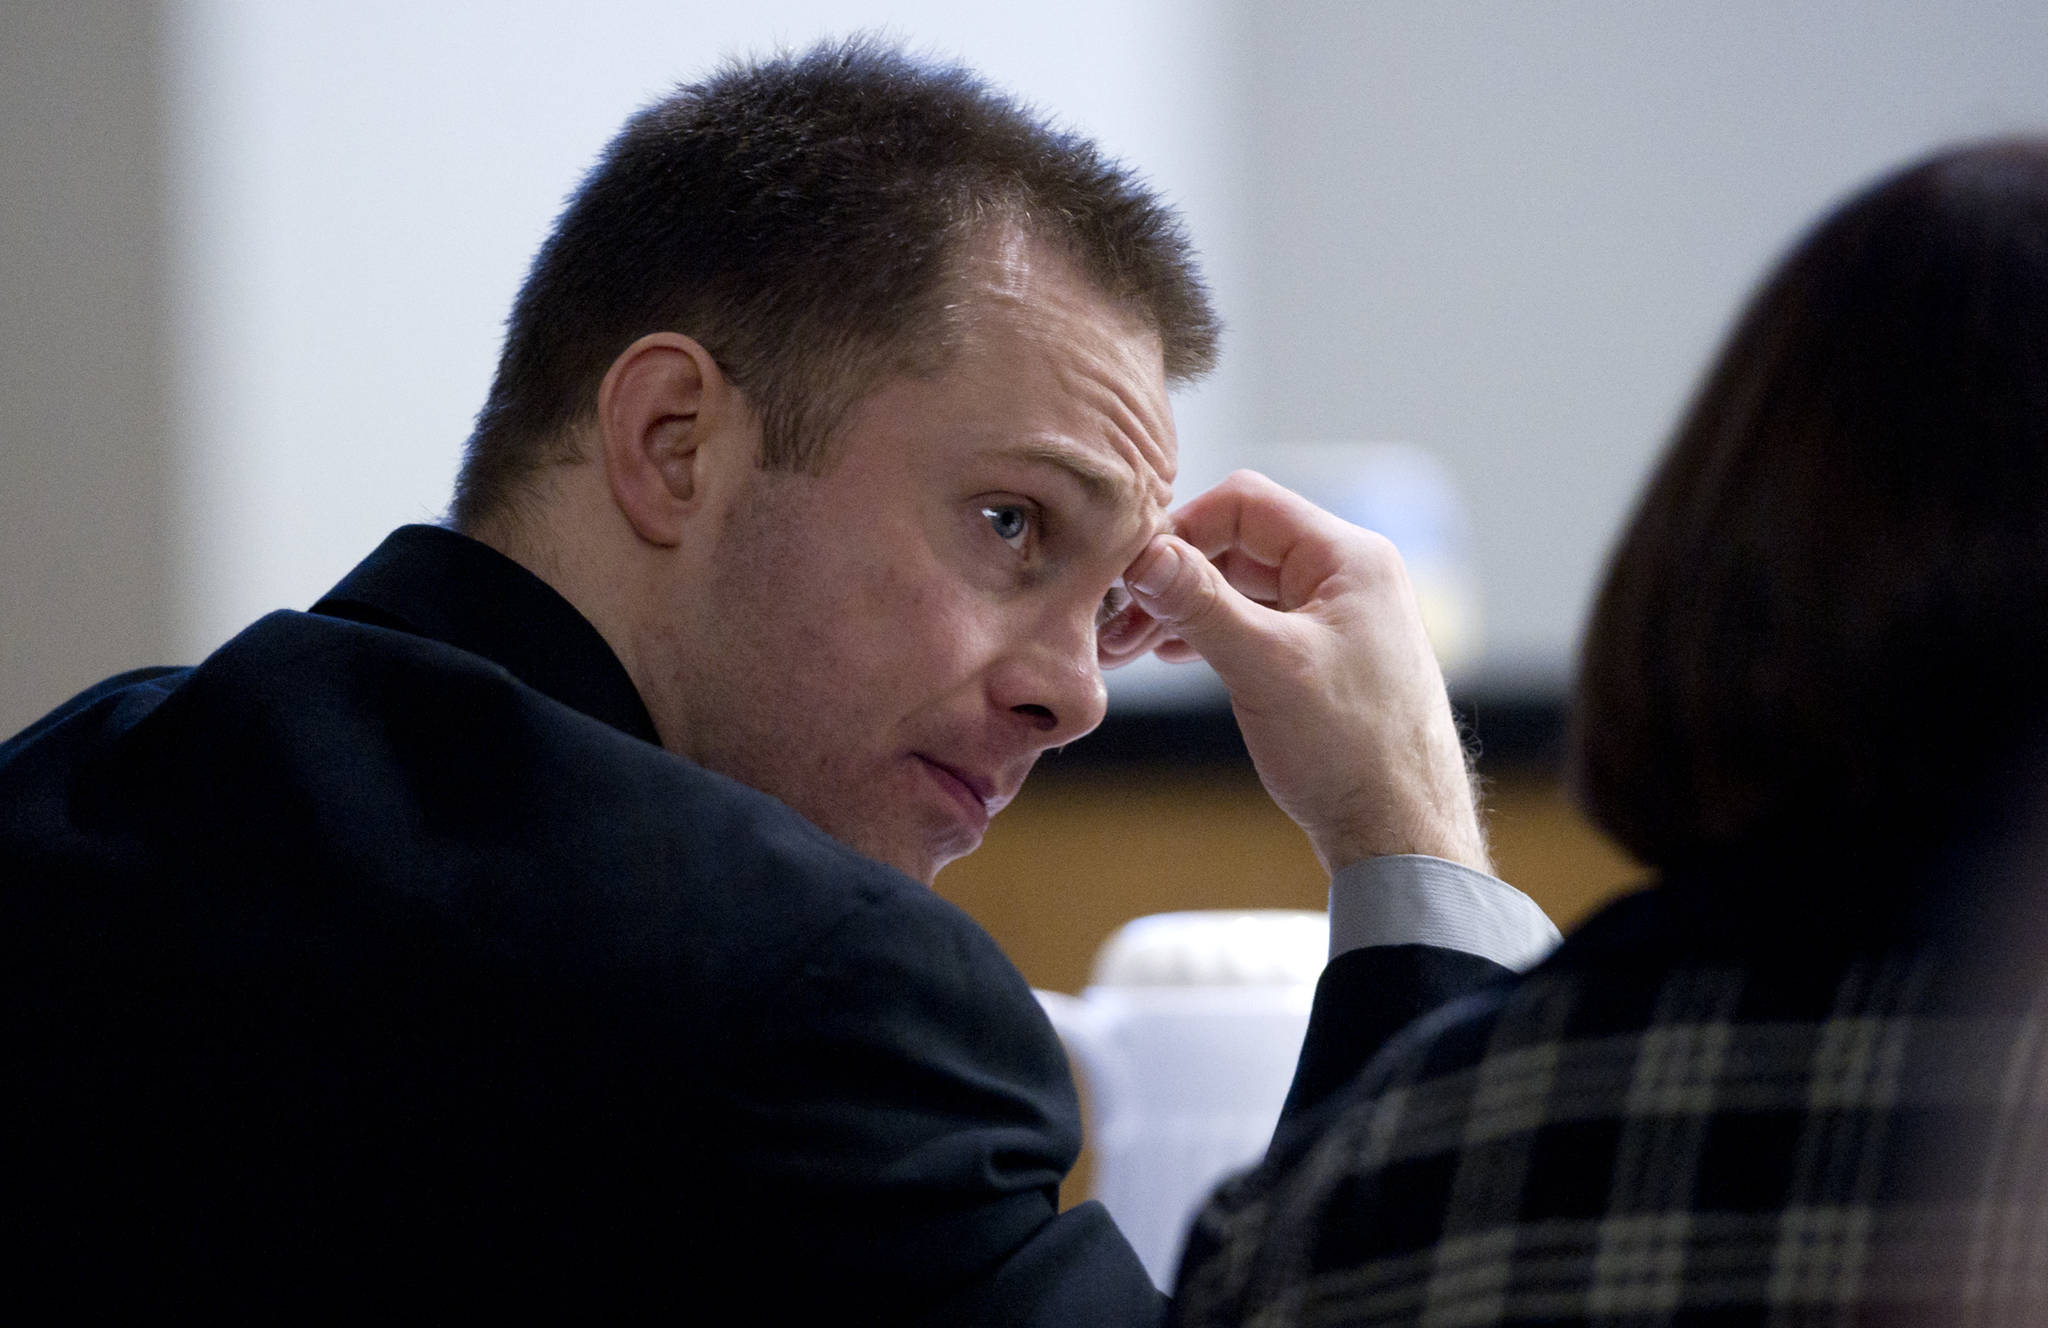 Christopher D. Strawn appears in Juneau Superior Court on Thursday, Feb. 9, 2017, during his first trial on charges in the murder of 30-year-old Brandon C. Cook at the Kodzoff Acres Mobile Home Park Oct. 20, 2015. (Michael Penn | Juneau Empire file)